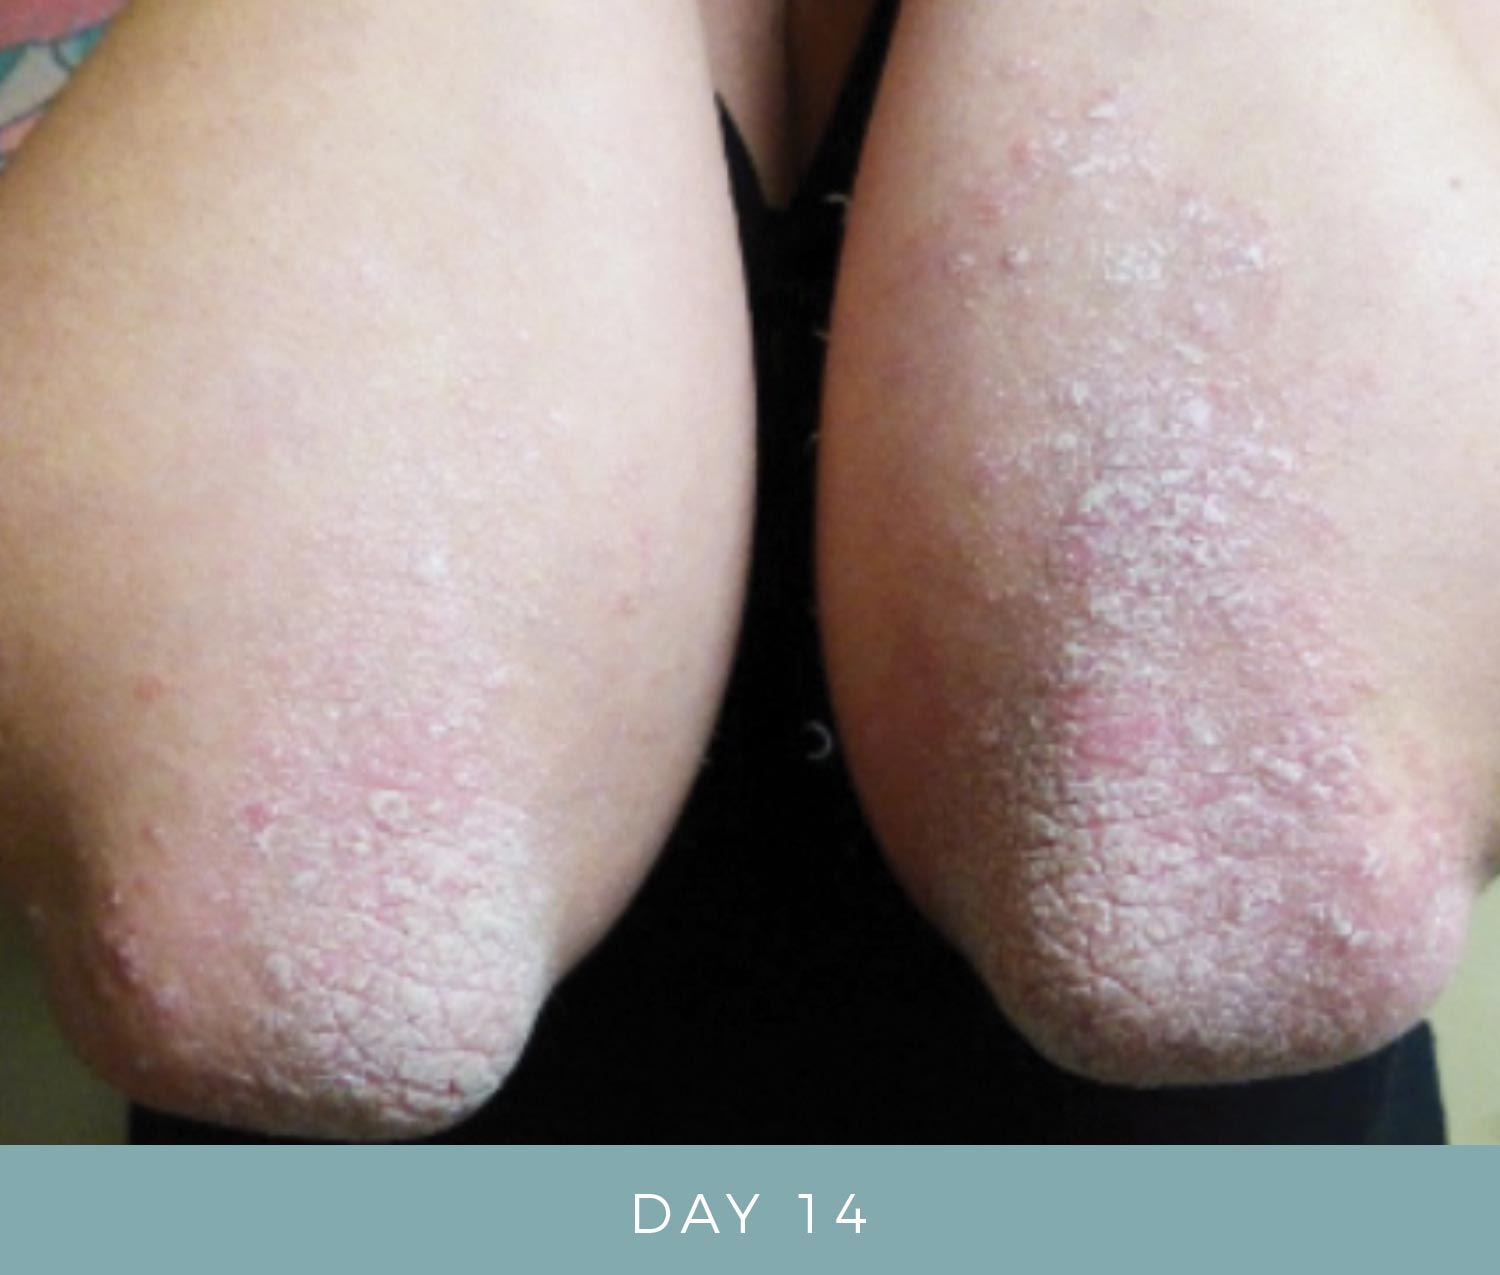 Before and After - Psoriasis